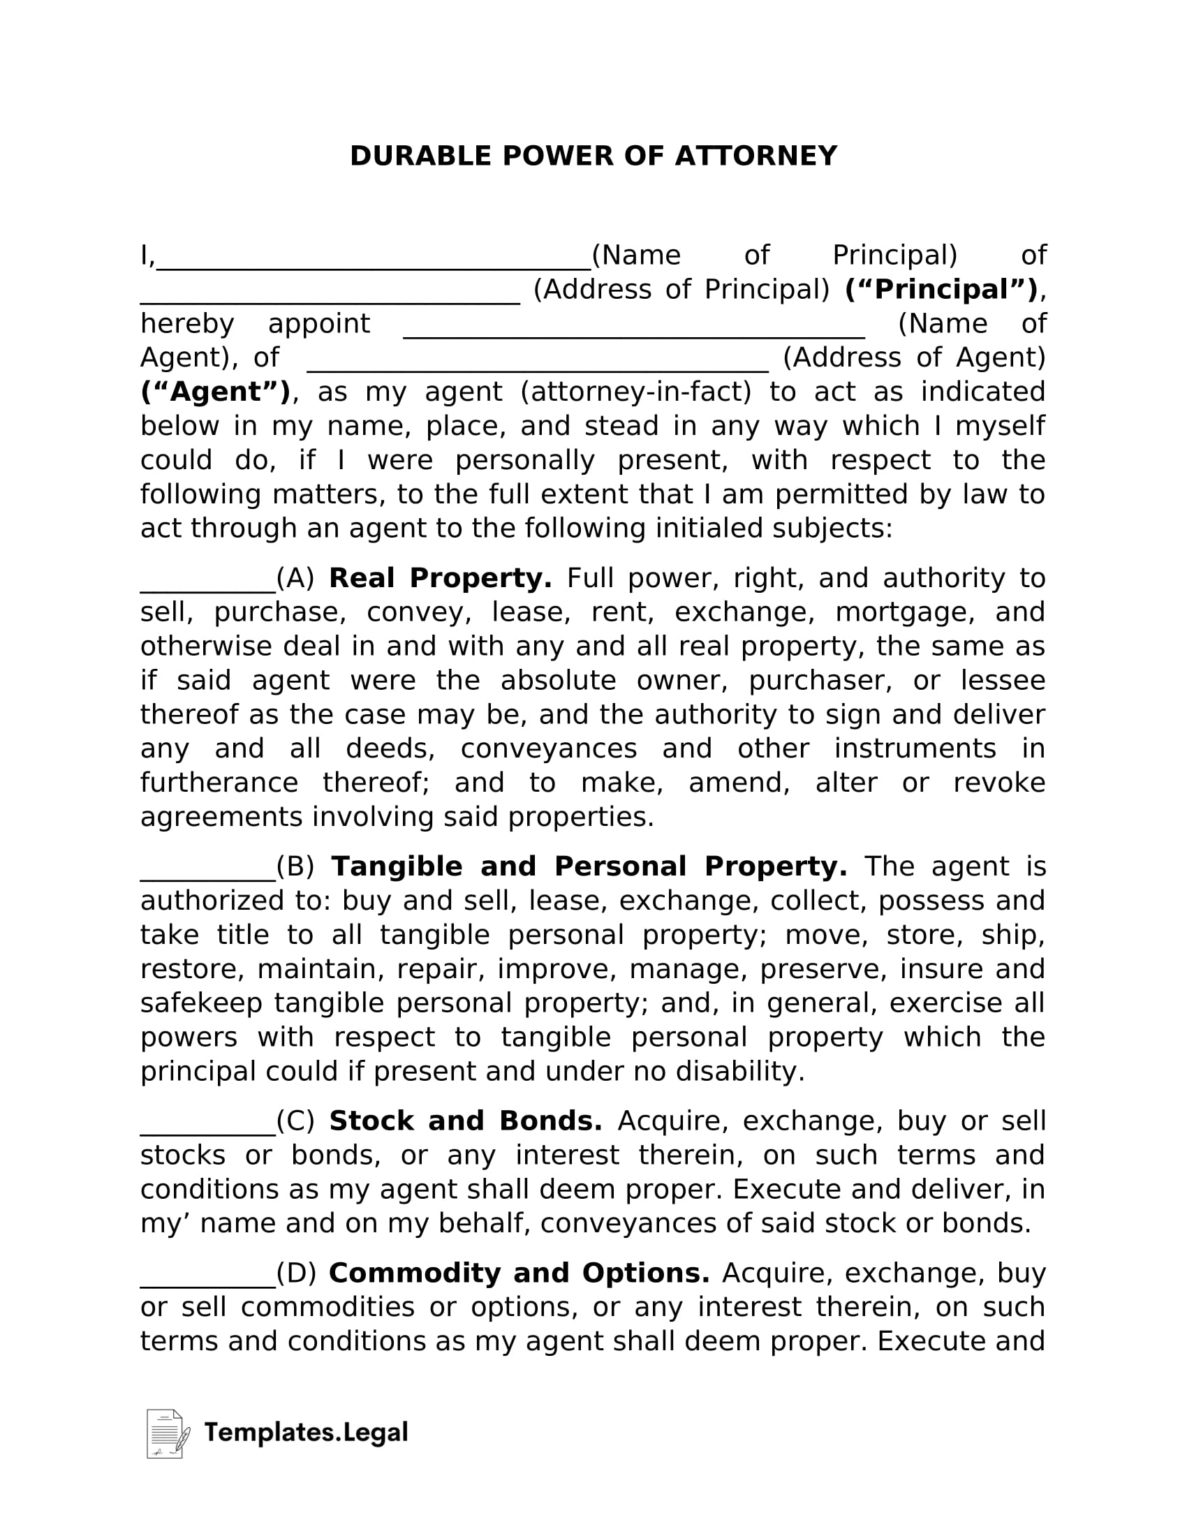 durable-power-of-attorney-templates-free-word-pdf-odt